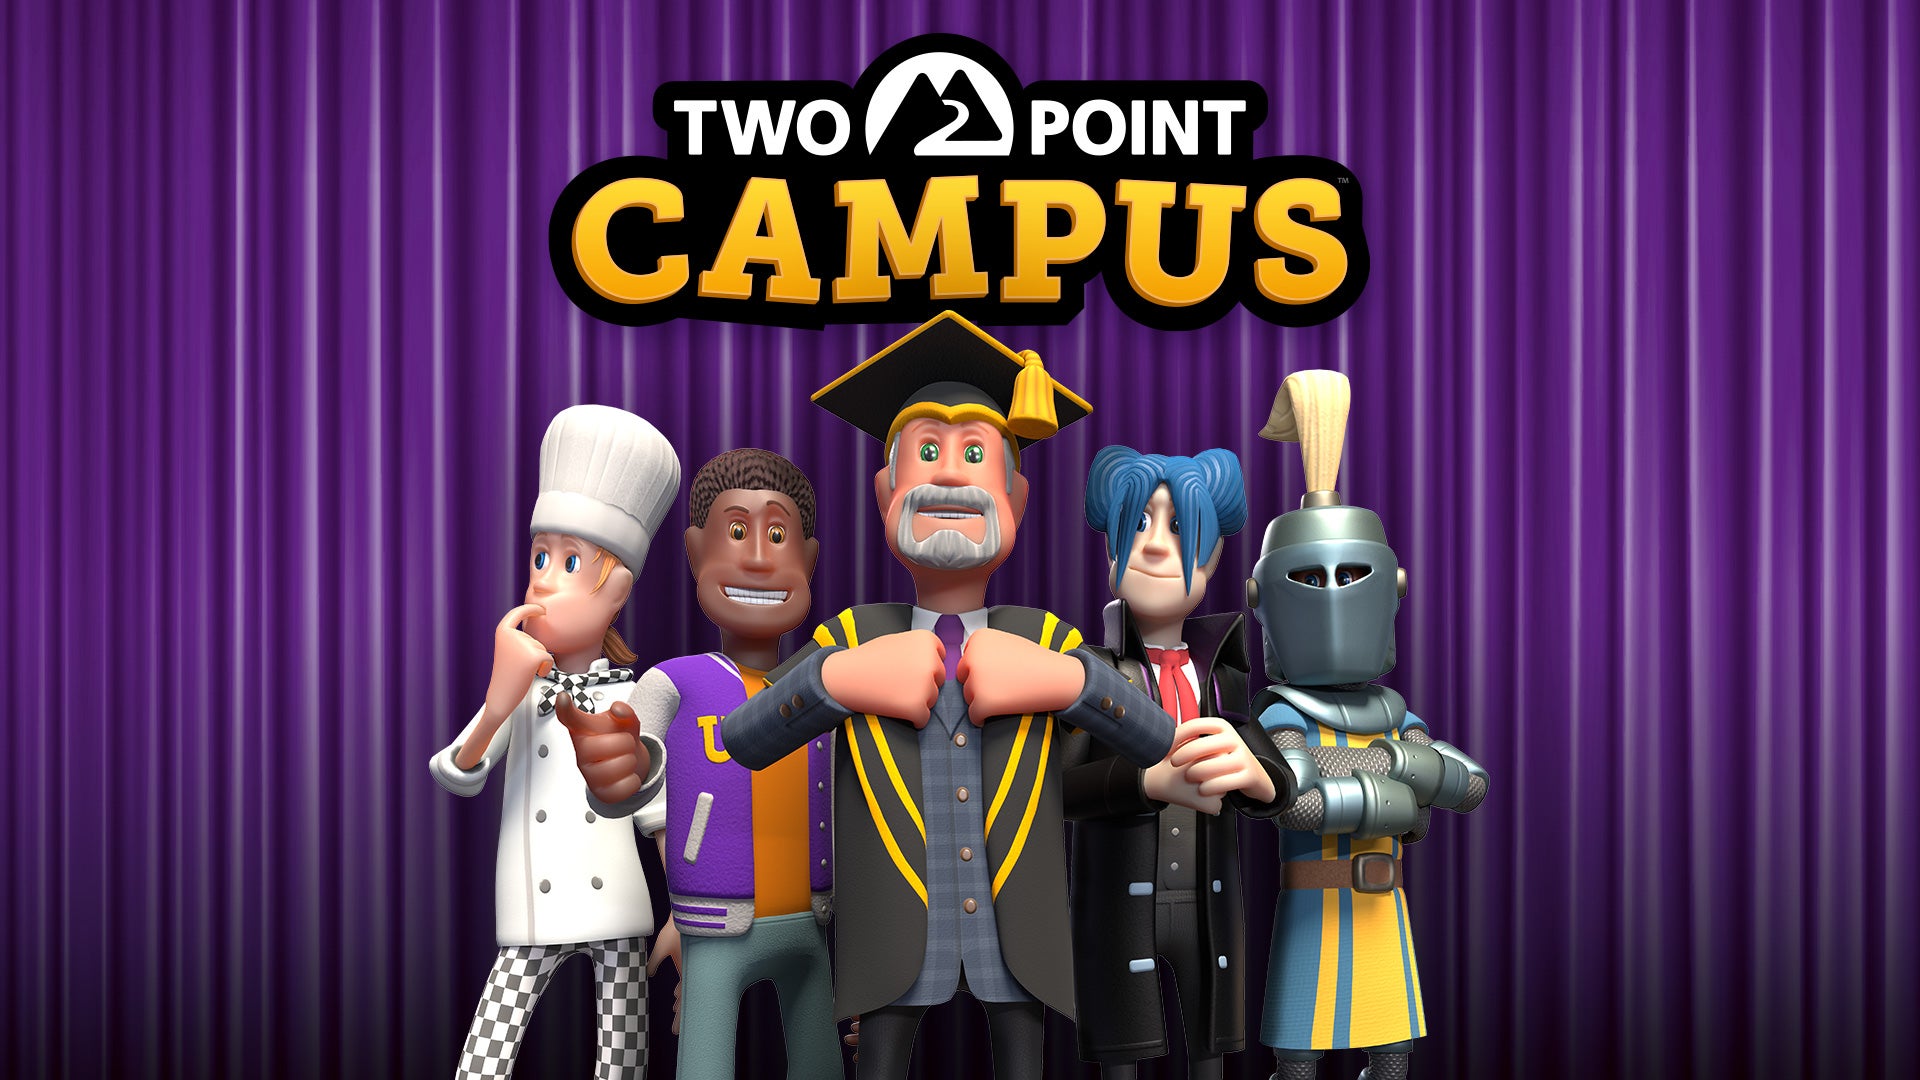 Image for How Two Point Campus twists the mundane with trademark jokes and relationships